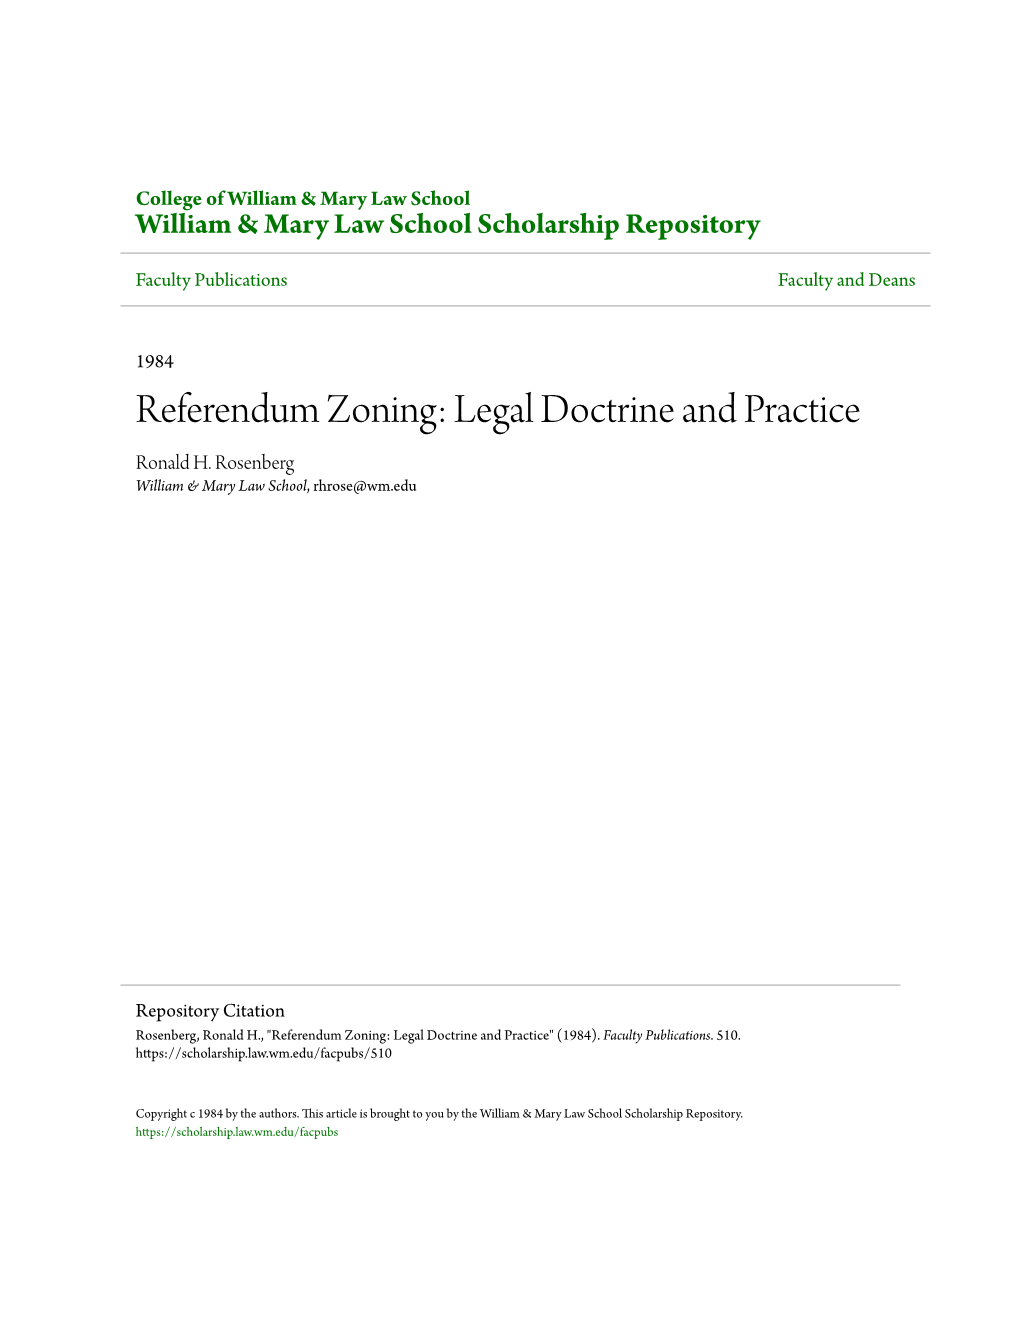 Referendum Zoning: Legal Doctrine and Practice Ronald H